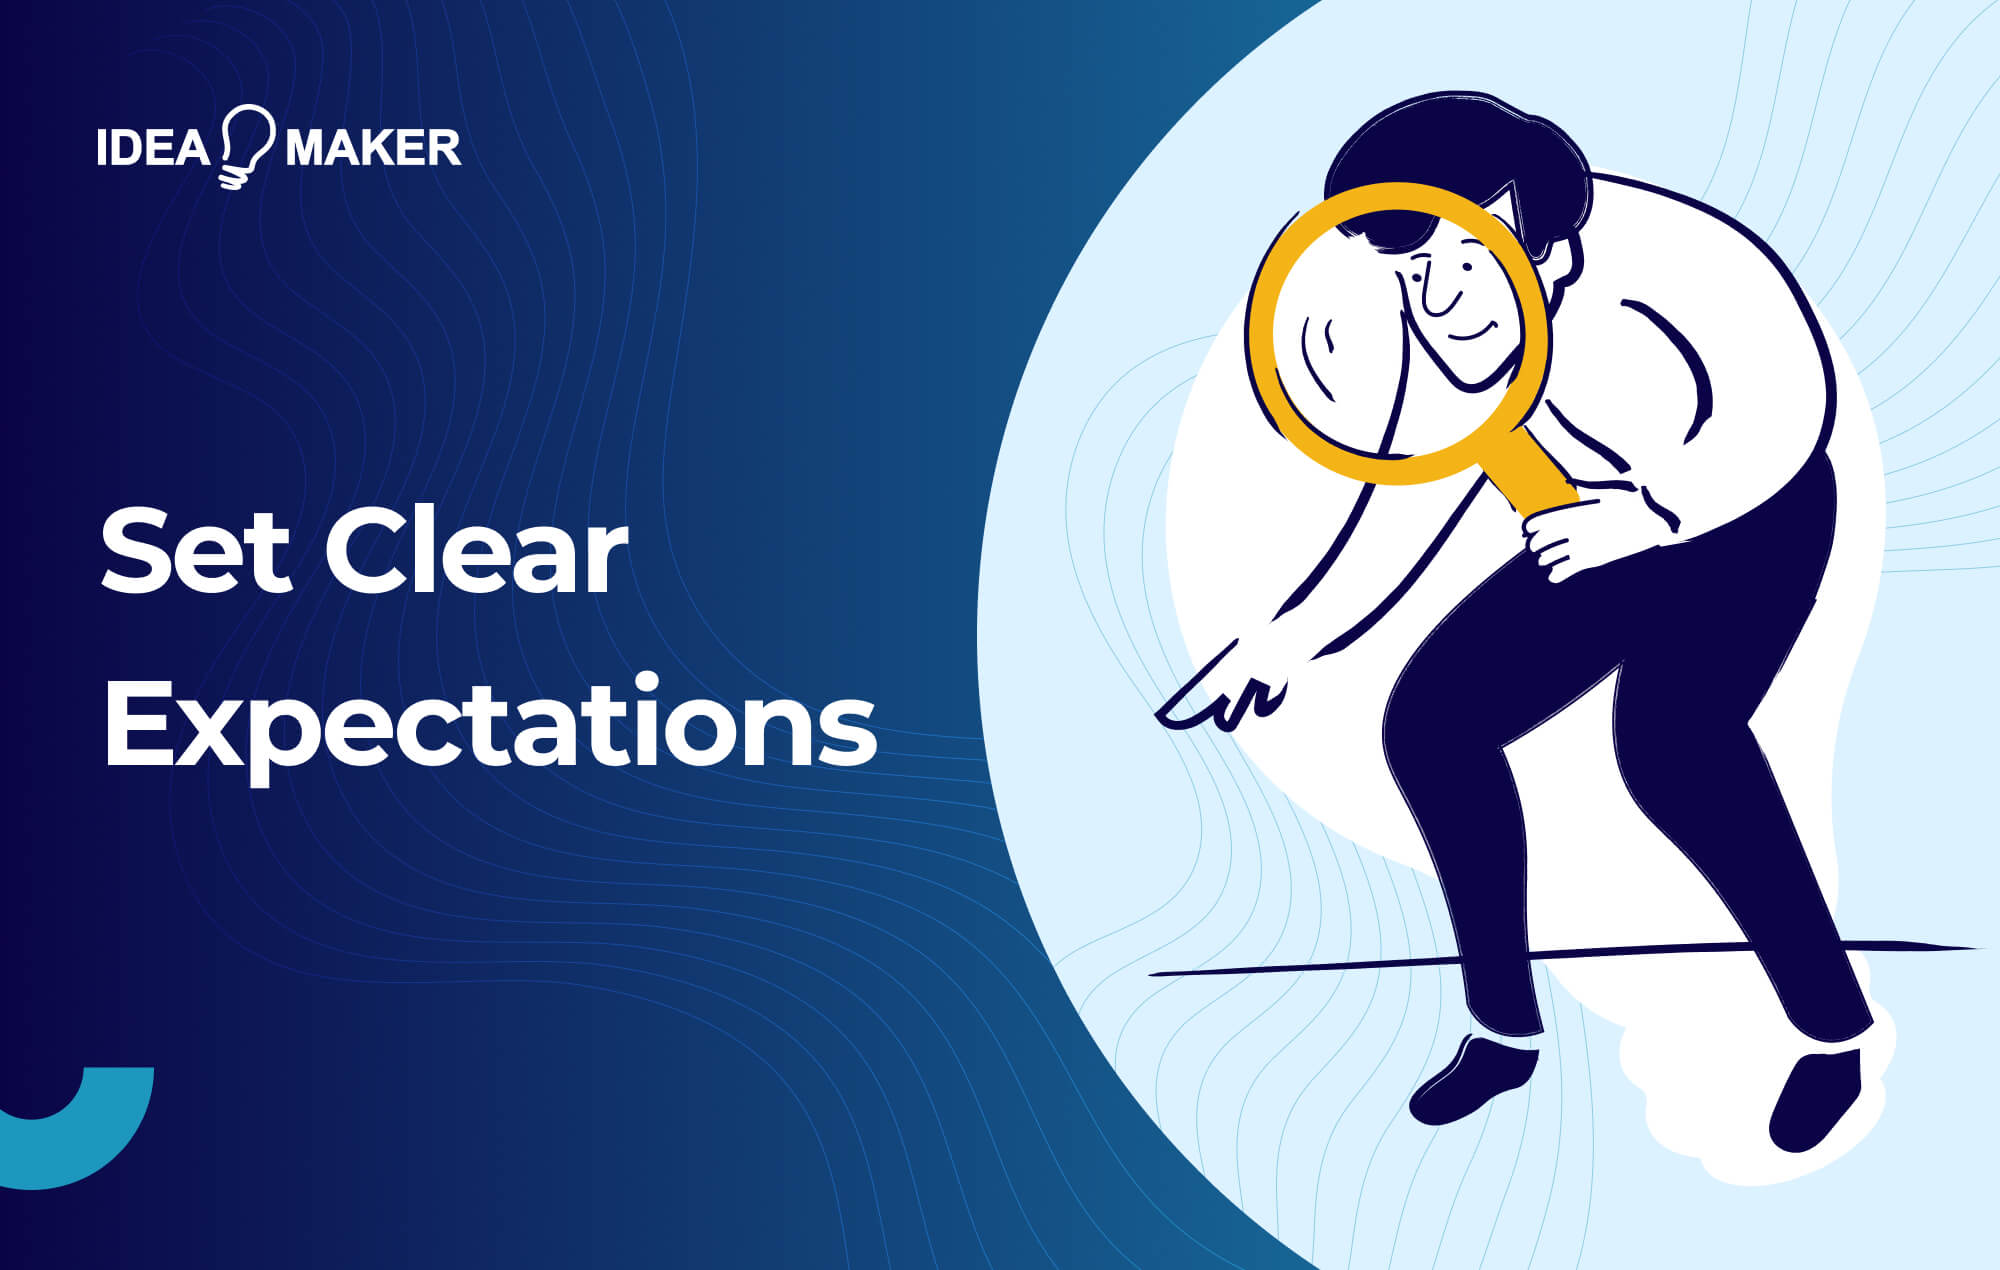 Ideamaker - Set Clear Expectations